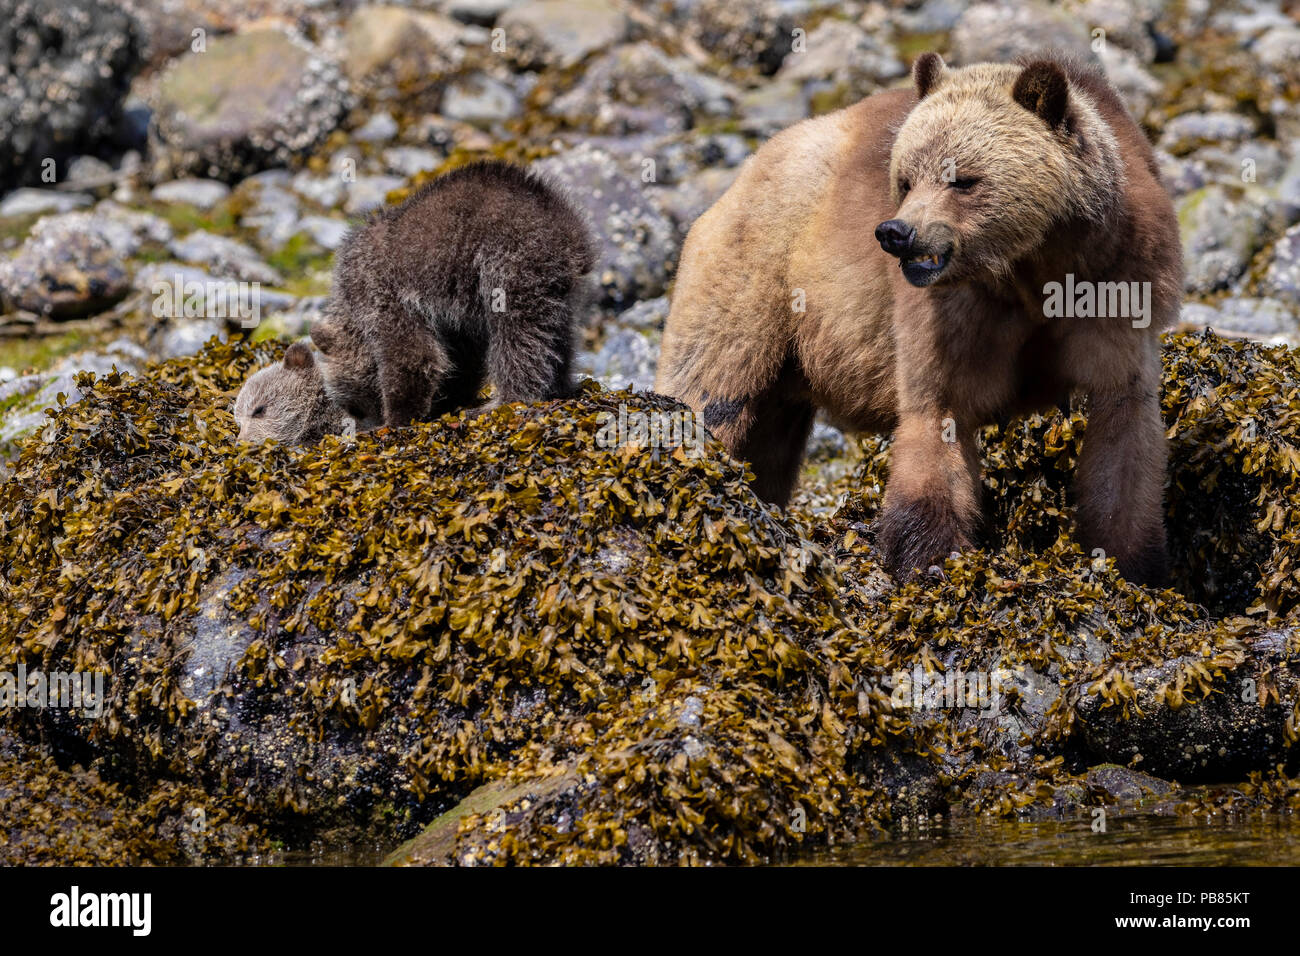 Grizzly bear (Ursus arctos horribilis) sow with two cubs feasting along the shoreline at low tide in Glendale Cove, Knight Inlet, First Nations Territ Stock Photo